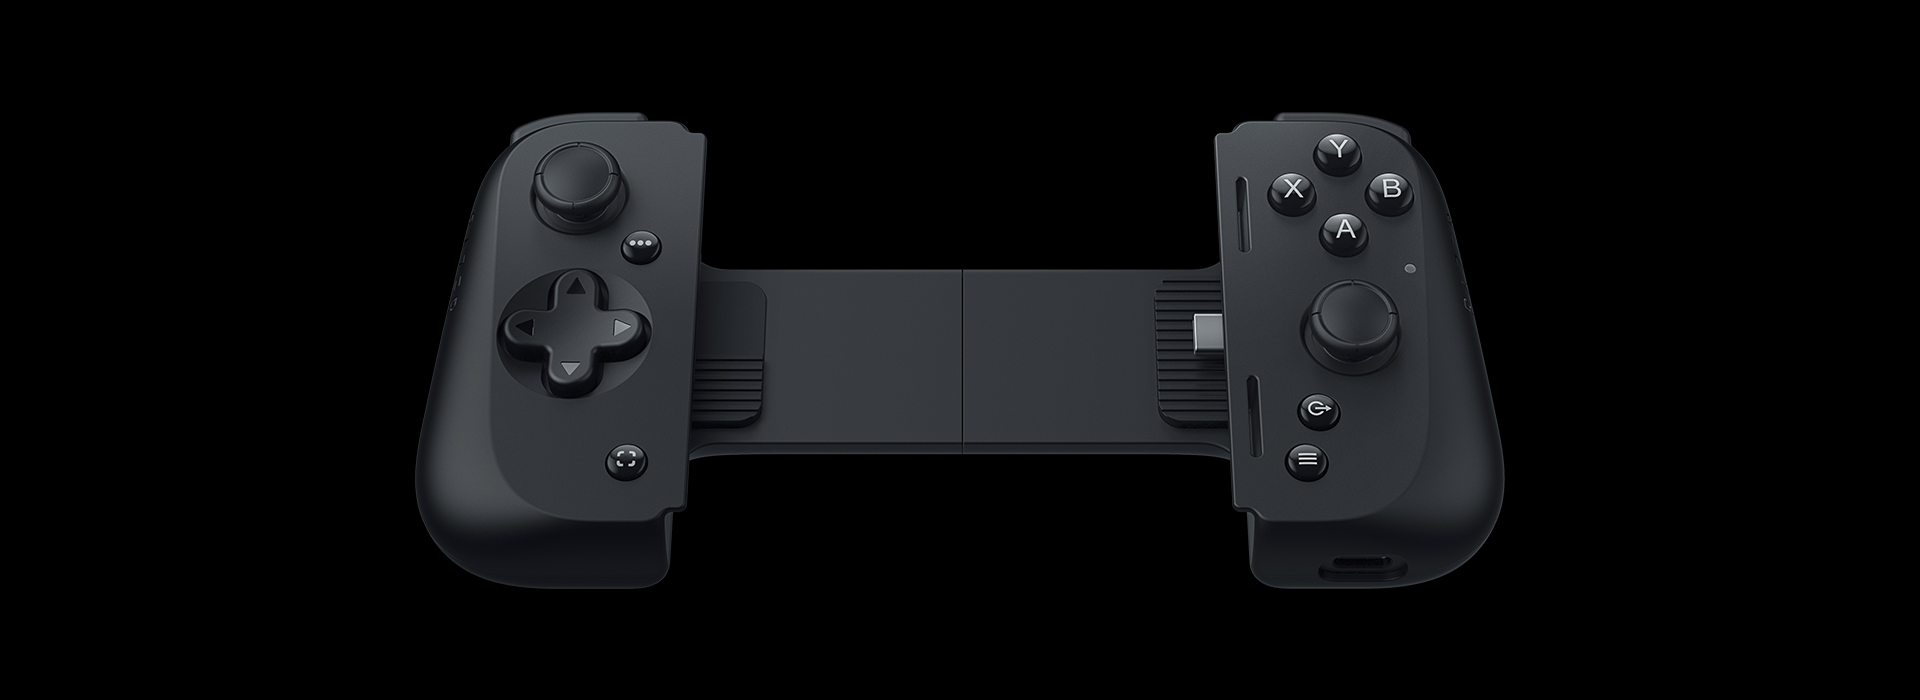 Review: Razer Kishi V2 refines the “gamepad that clamps to phone